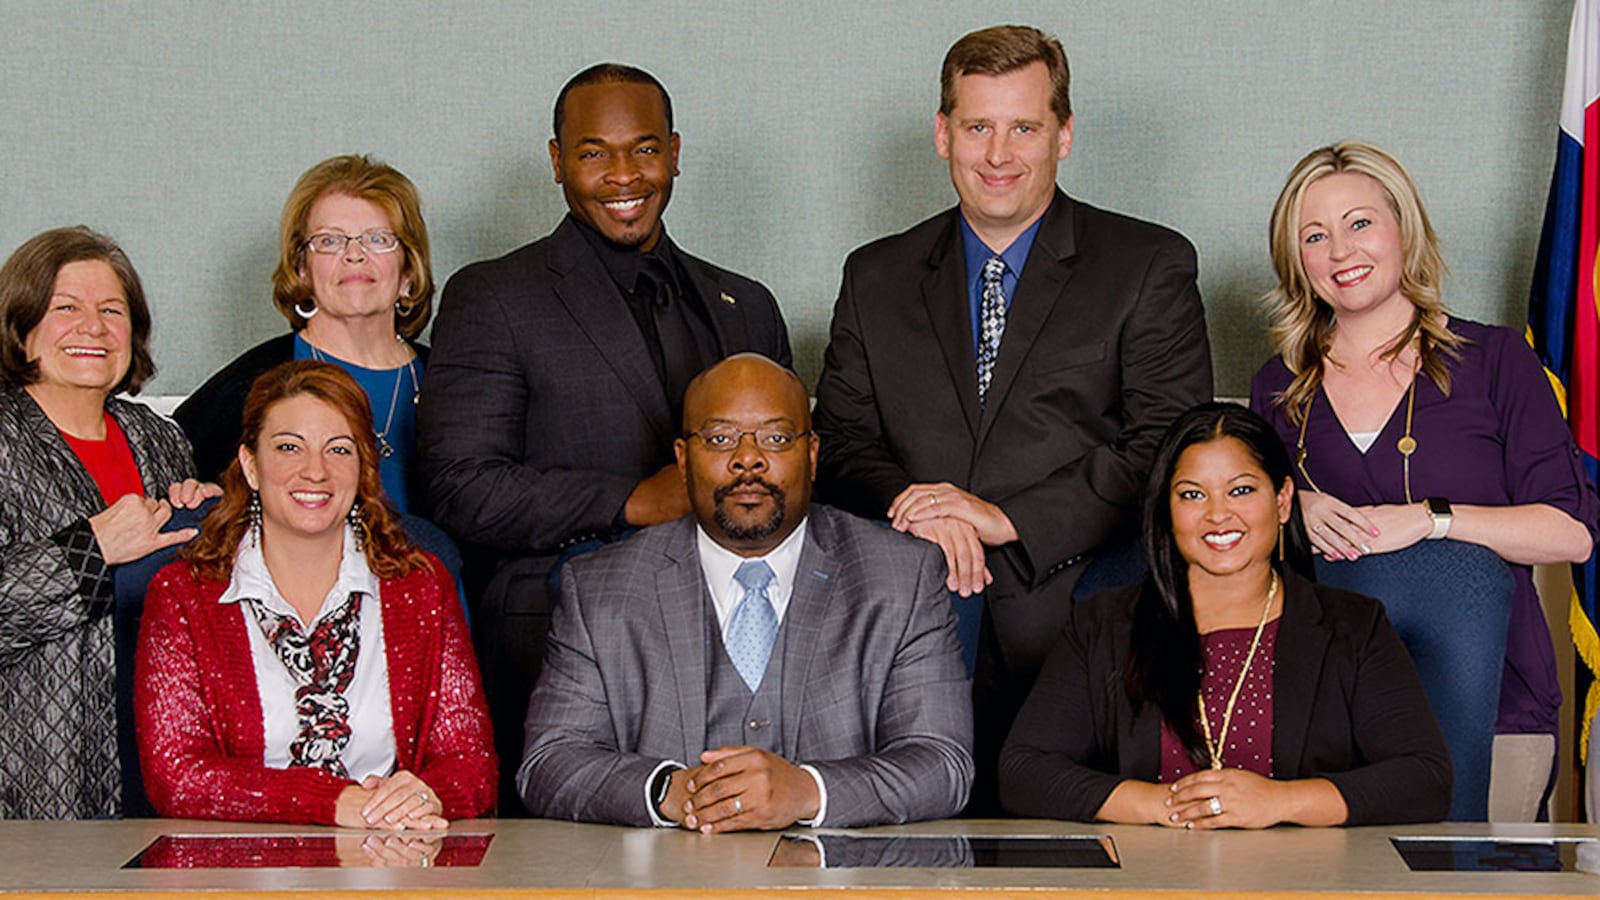 The Aurora school board poses with Superintendent Rico Munn. Eric Nelson is third from the left in the top row. Amber Drevon is first on the left in the bottom row.